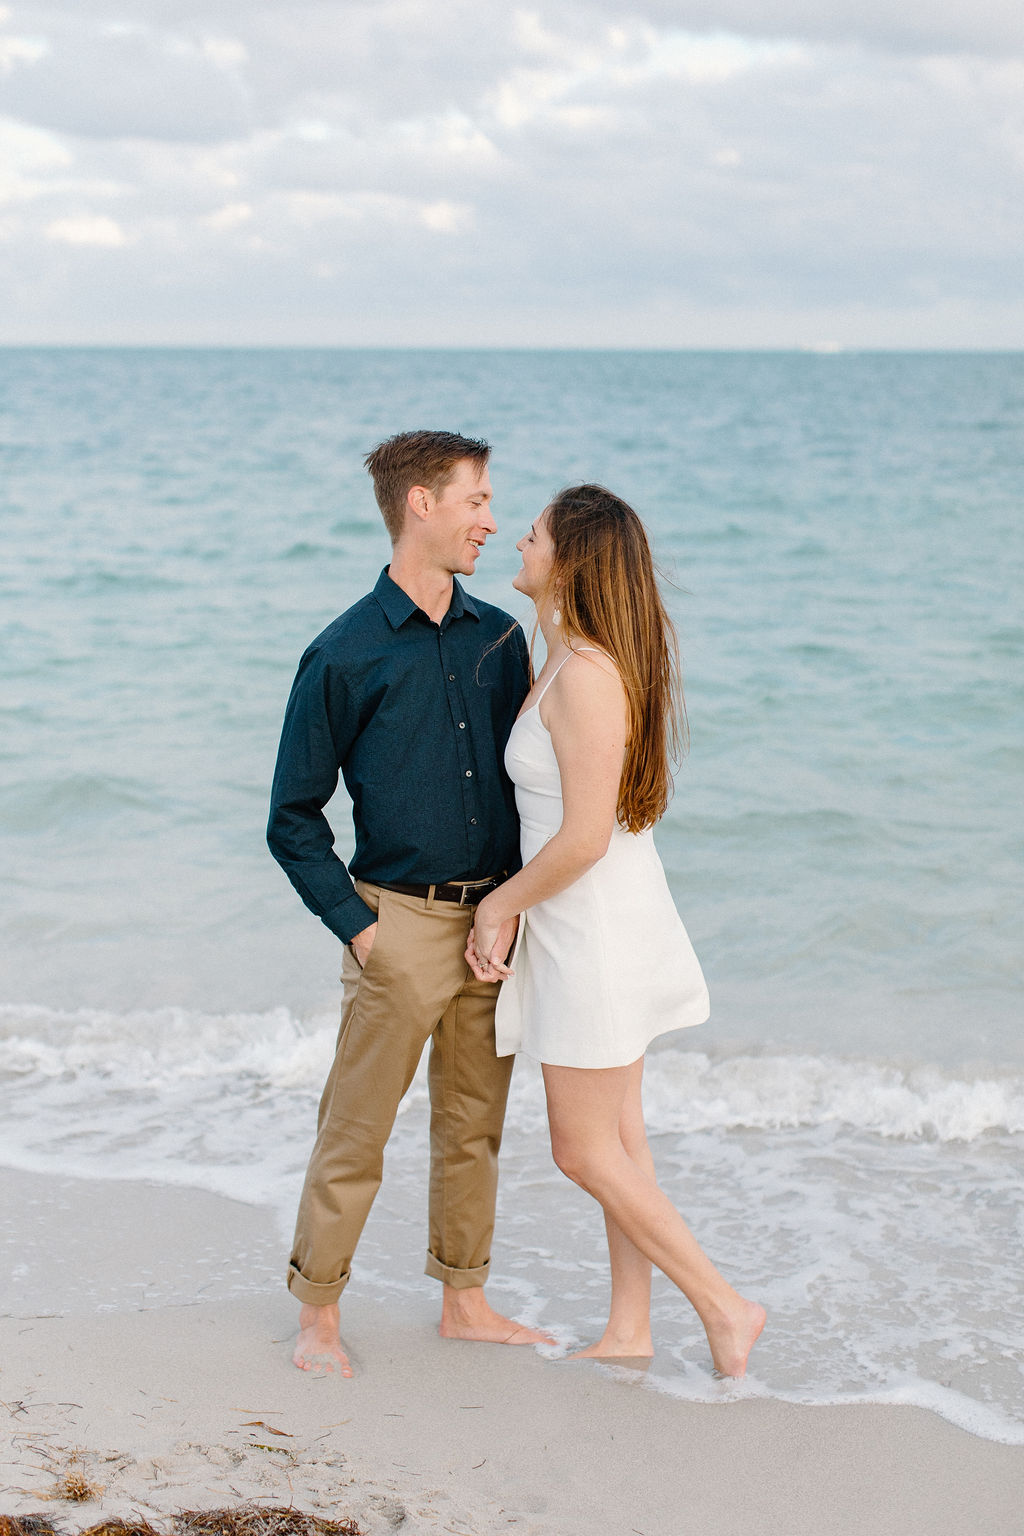 Bill Baggs State Park Engagement Pictures, Bill Baggs Engagement Photos, Miami Engagement Photographer, Engagement Photographer Miami, Erika Tuesta Photography